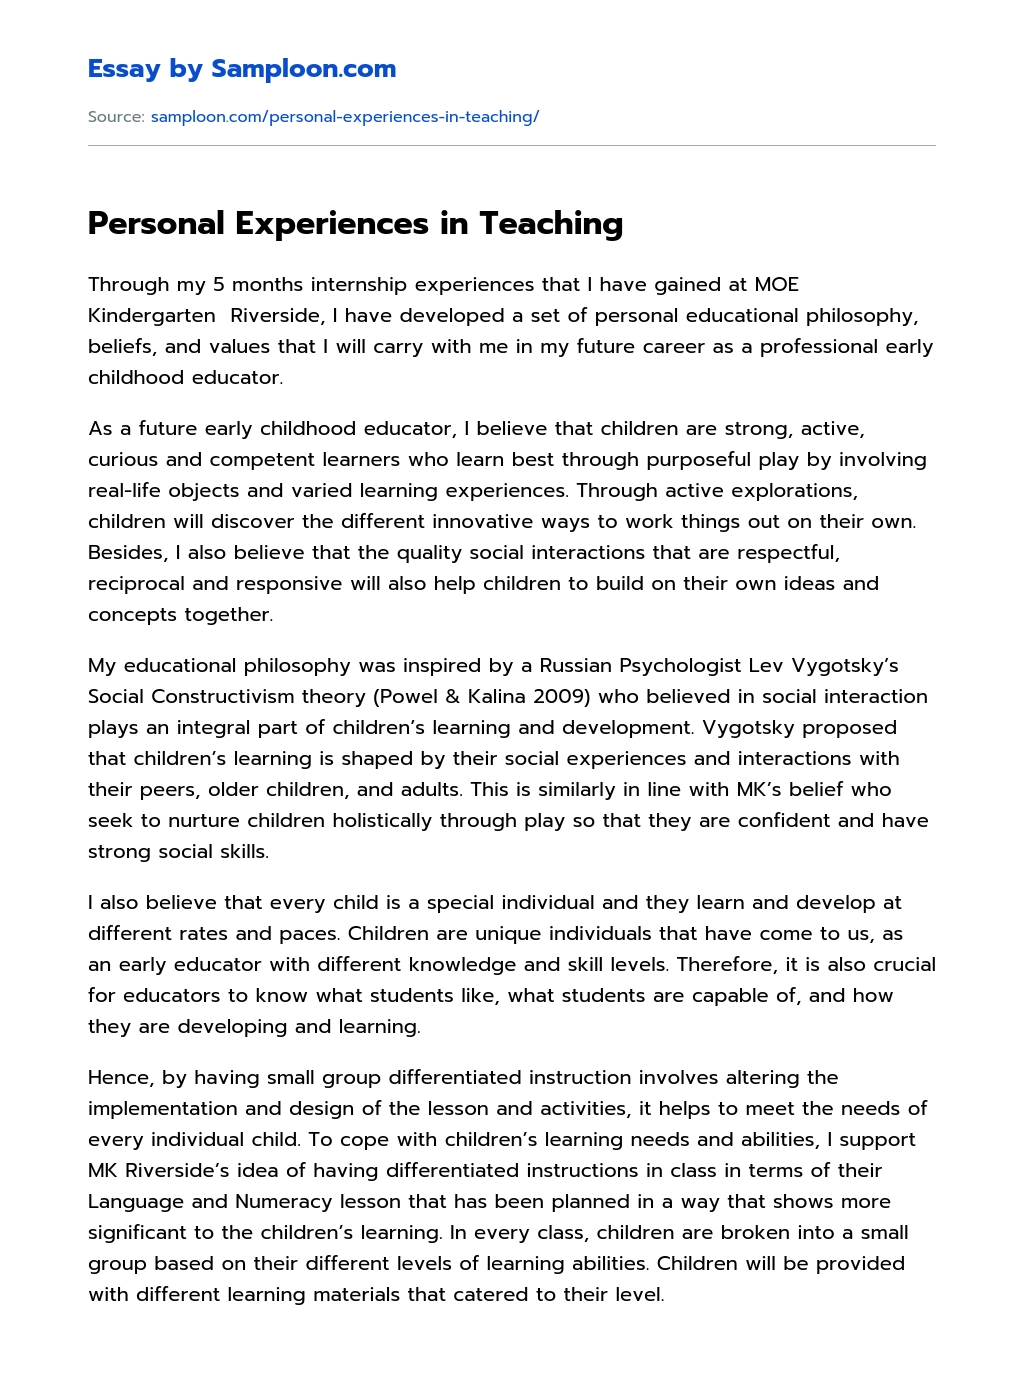 Personal Experiences in Teaching essay